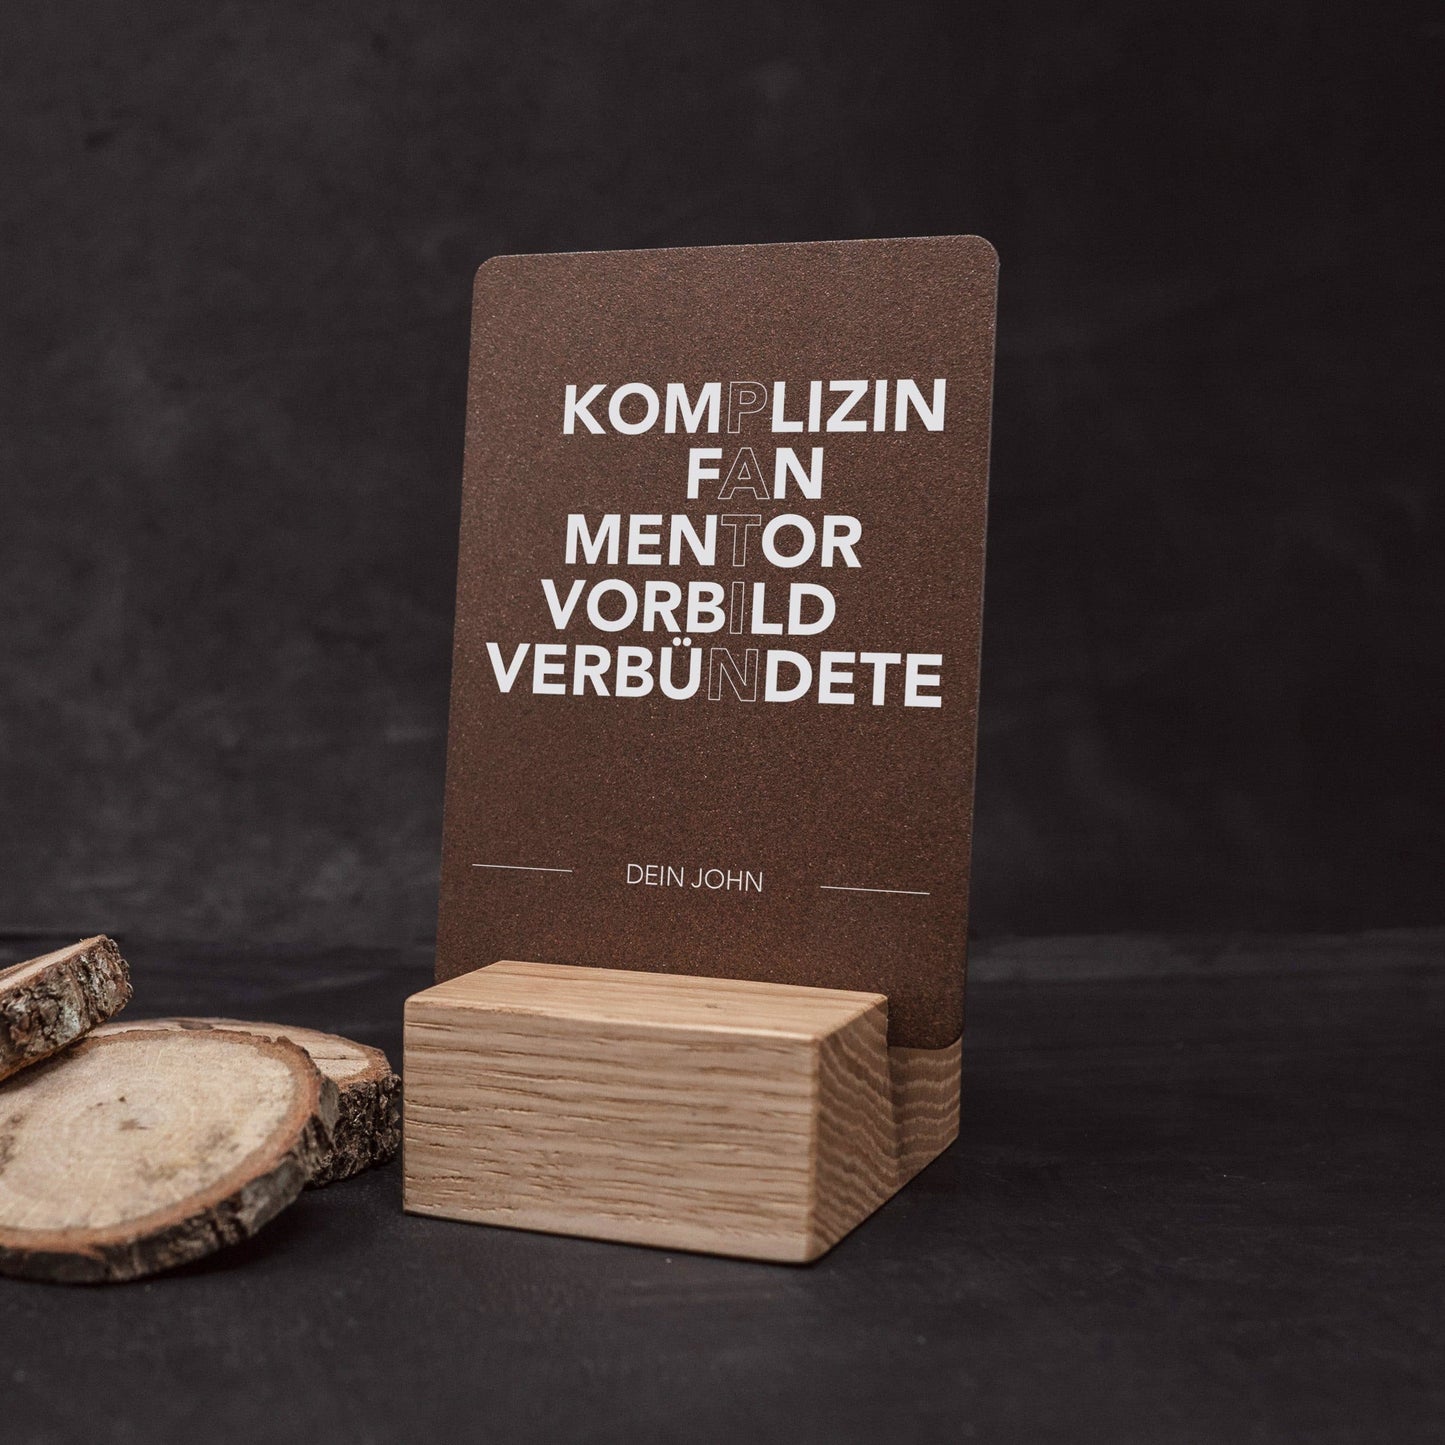 Little Message - Typografie Synonyme Patin Craftbrothers 